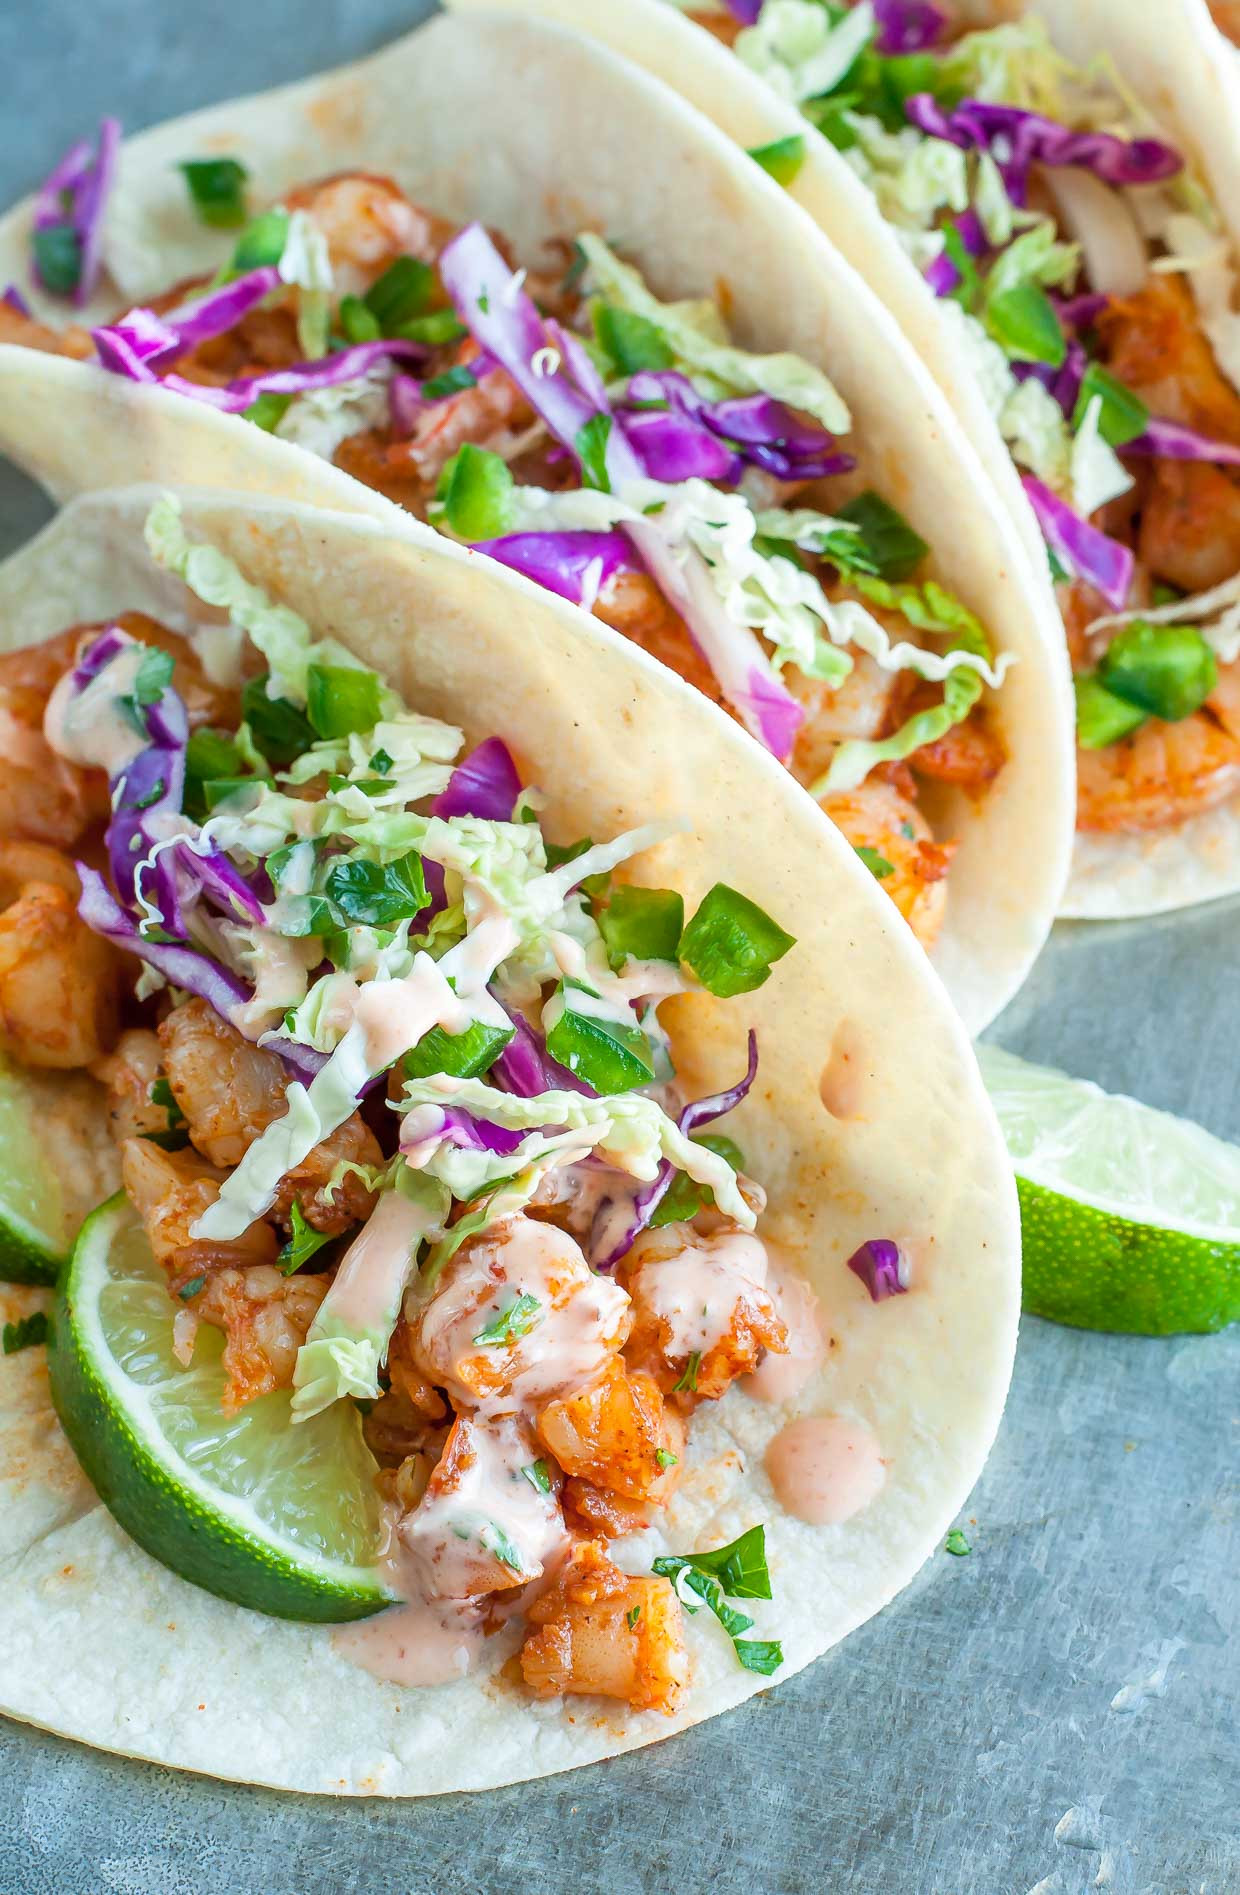 Healthy Side Dishes For Tacos
 Spicy Sriracha Shrimp Tacos with Cilantro Lime Slaw Peas